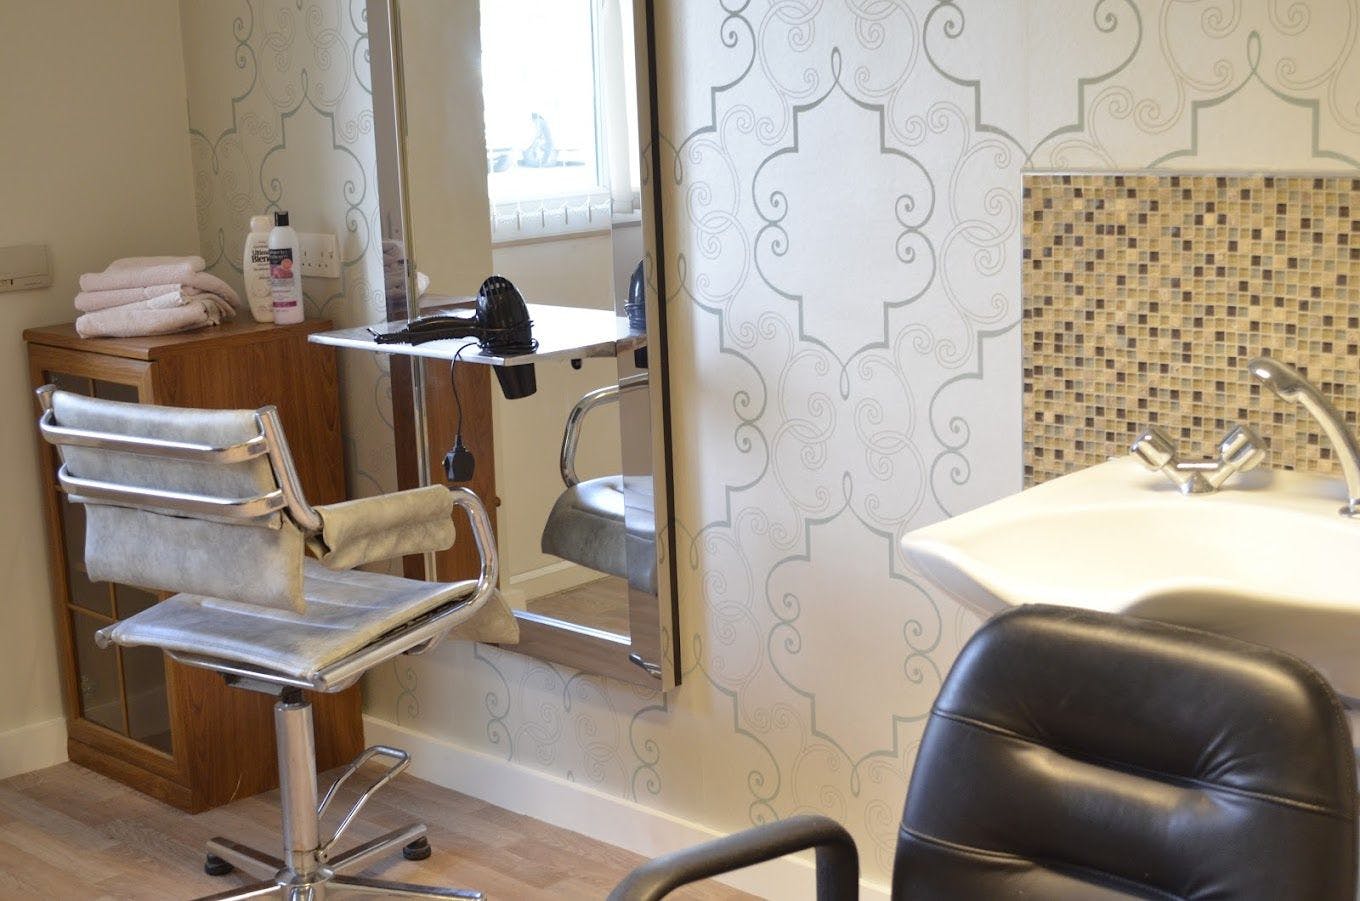 Salon at Longlands Care Home in Oxford, Oxfordshire